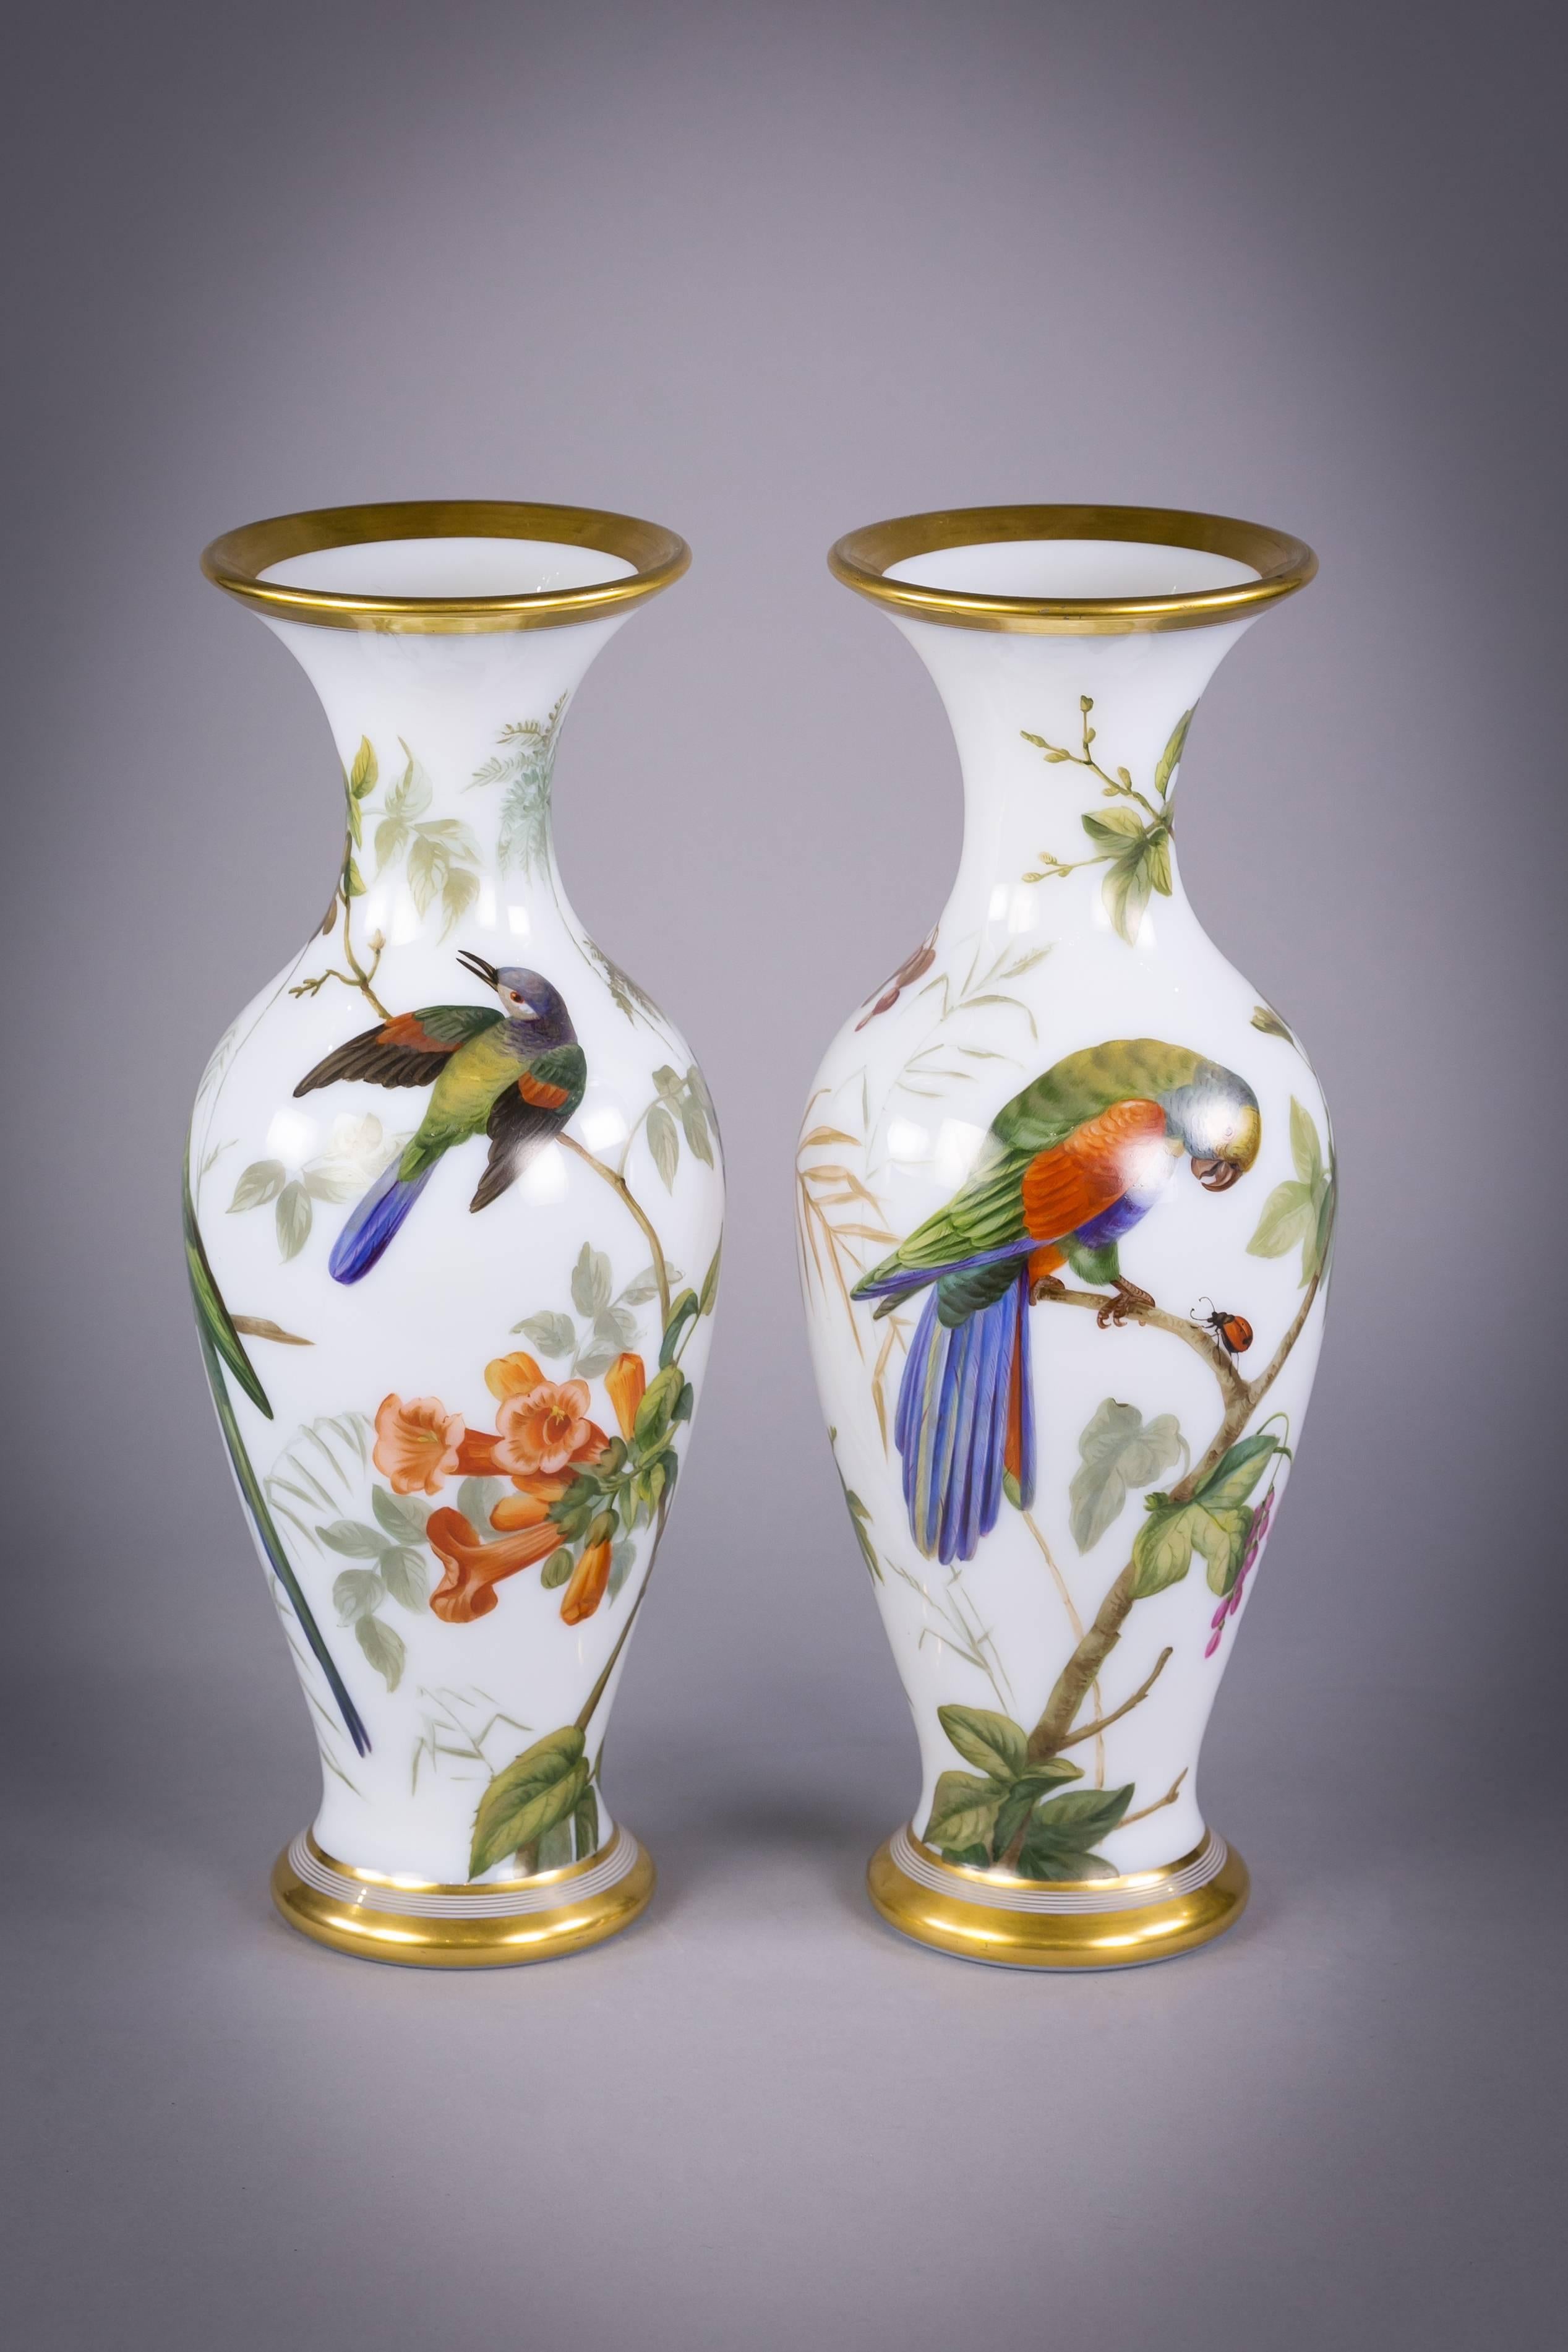 Pair of French opaline bases, Baccarat, circa 1835.